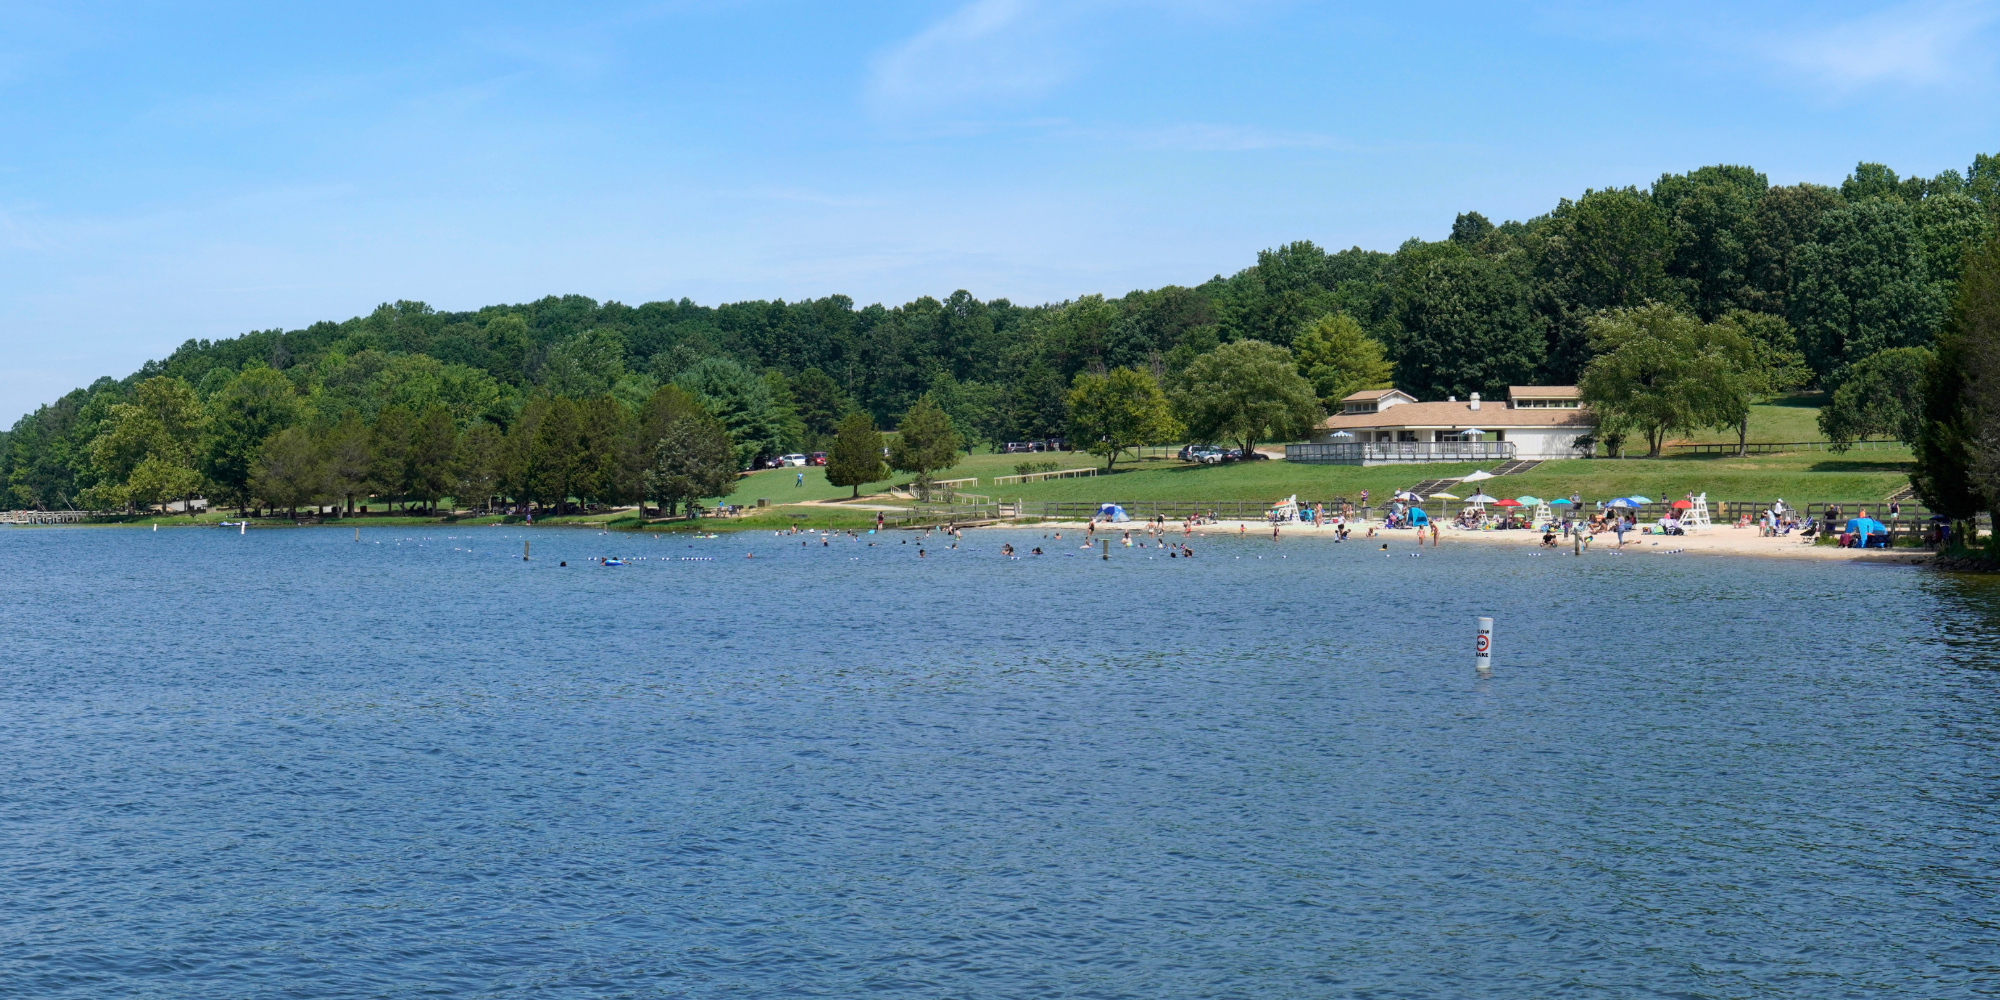 A view of the lake and sandy shore at Lake Anna State Park in Virginia